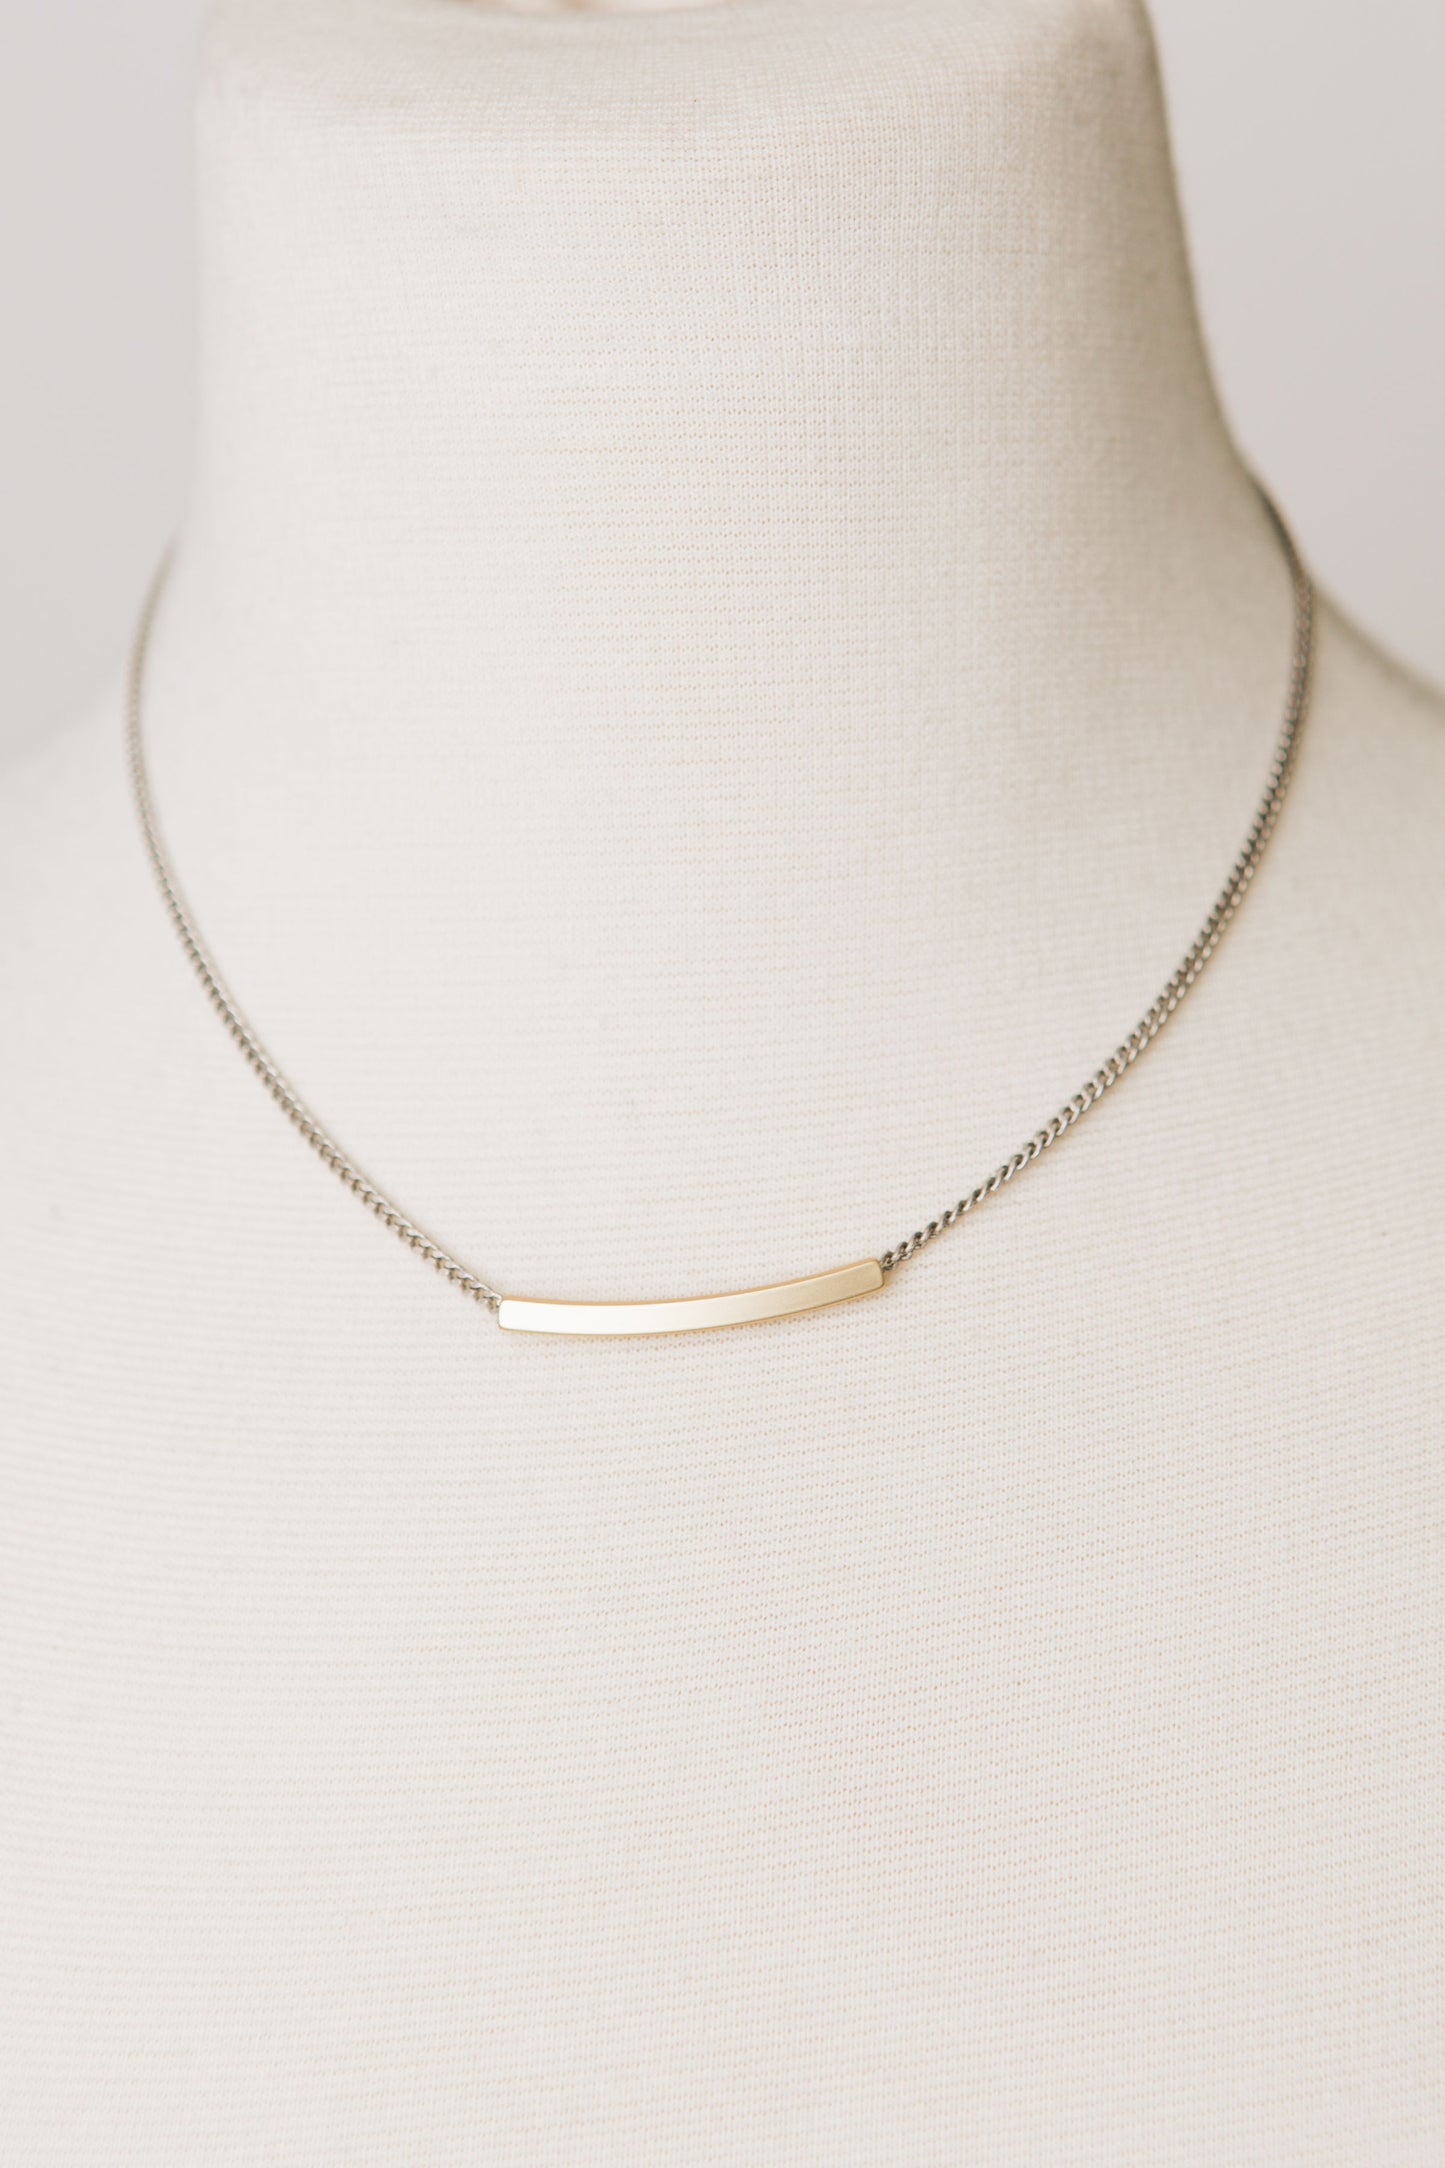 Muse - Necklace with Curved Bar Slider